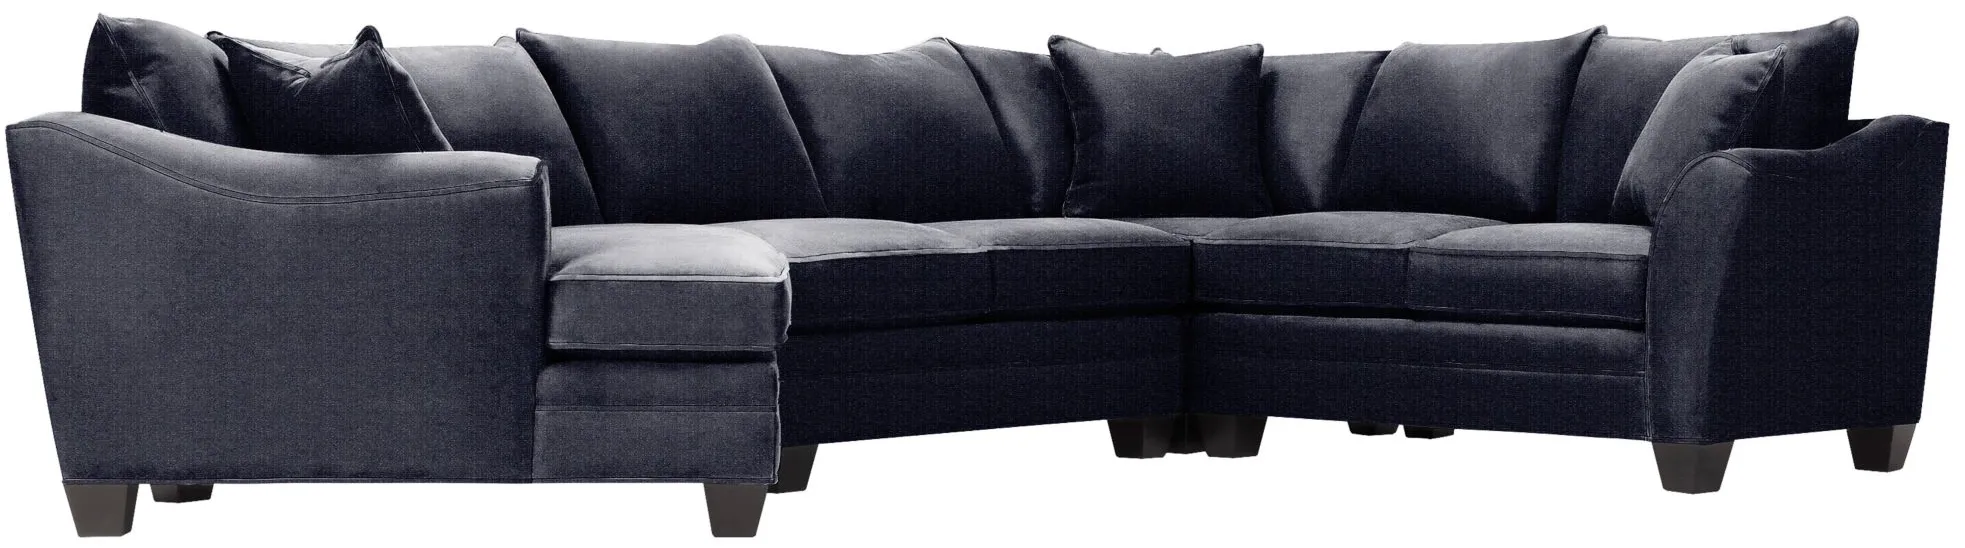 Foresthill 4-pc. Right Hand Cuddler Sectional Sofa in Sugar Shack Navy by H.M. Richards